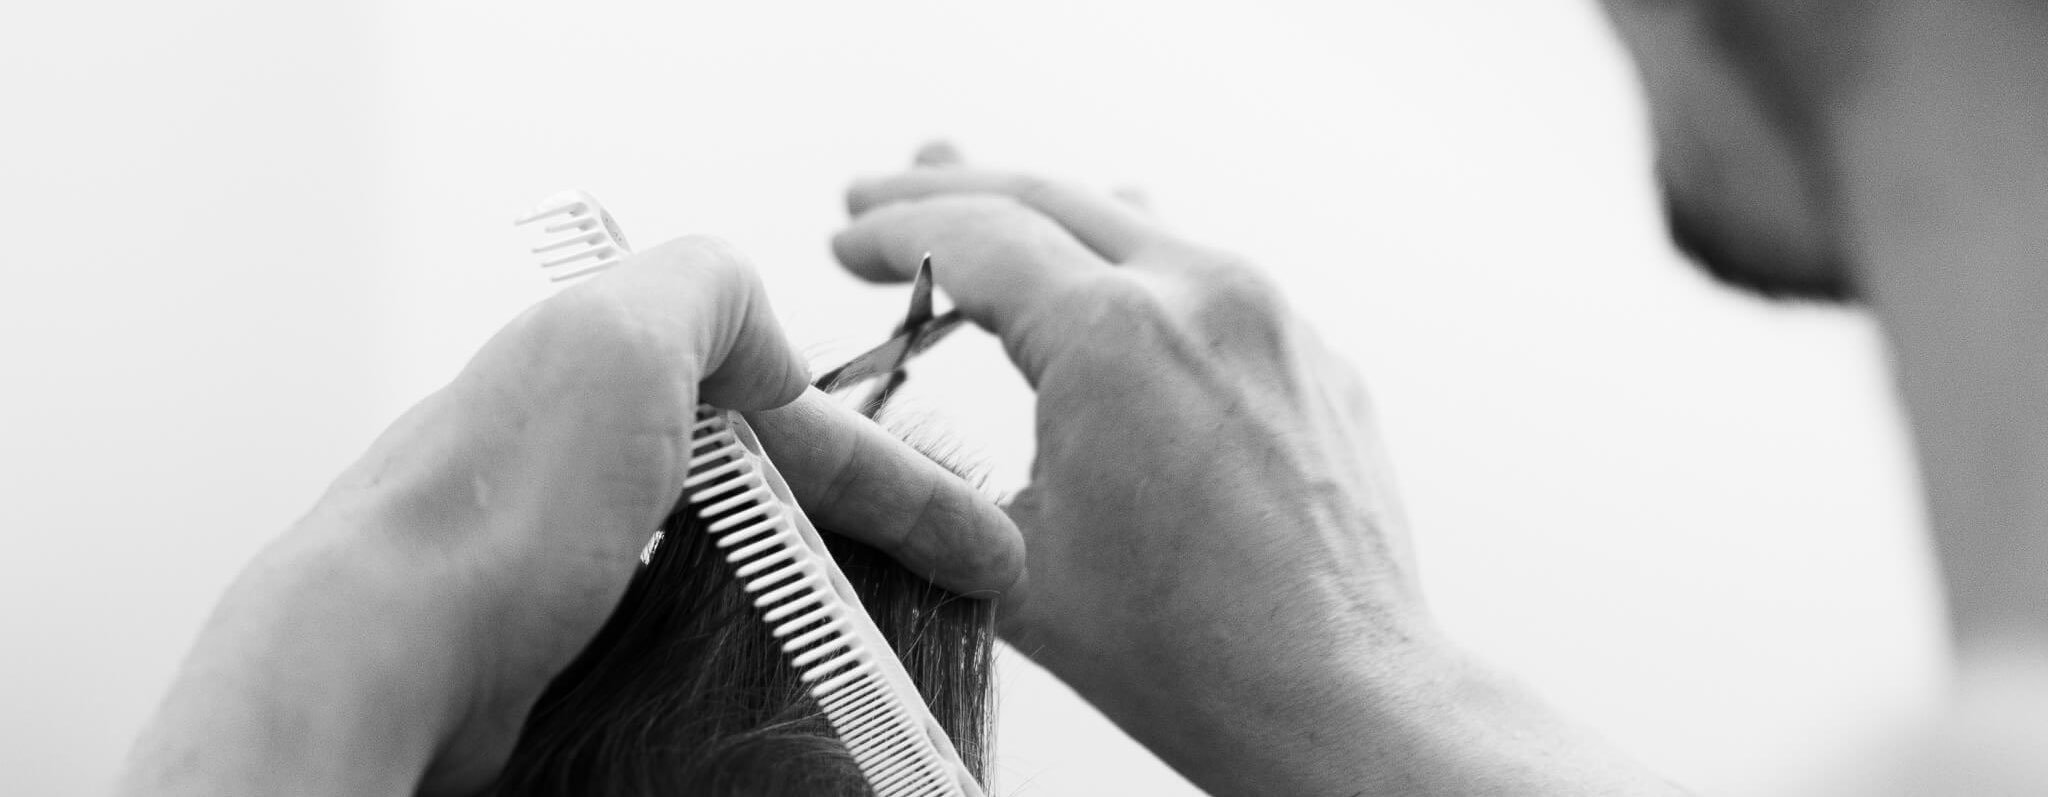 Hair being cut with scissor and comb